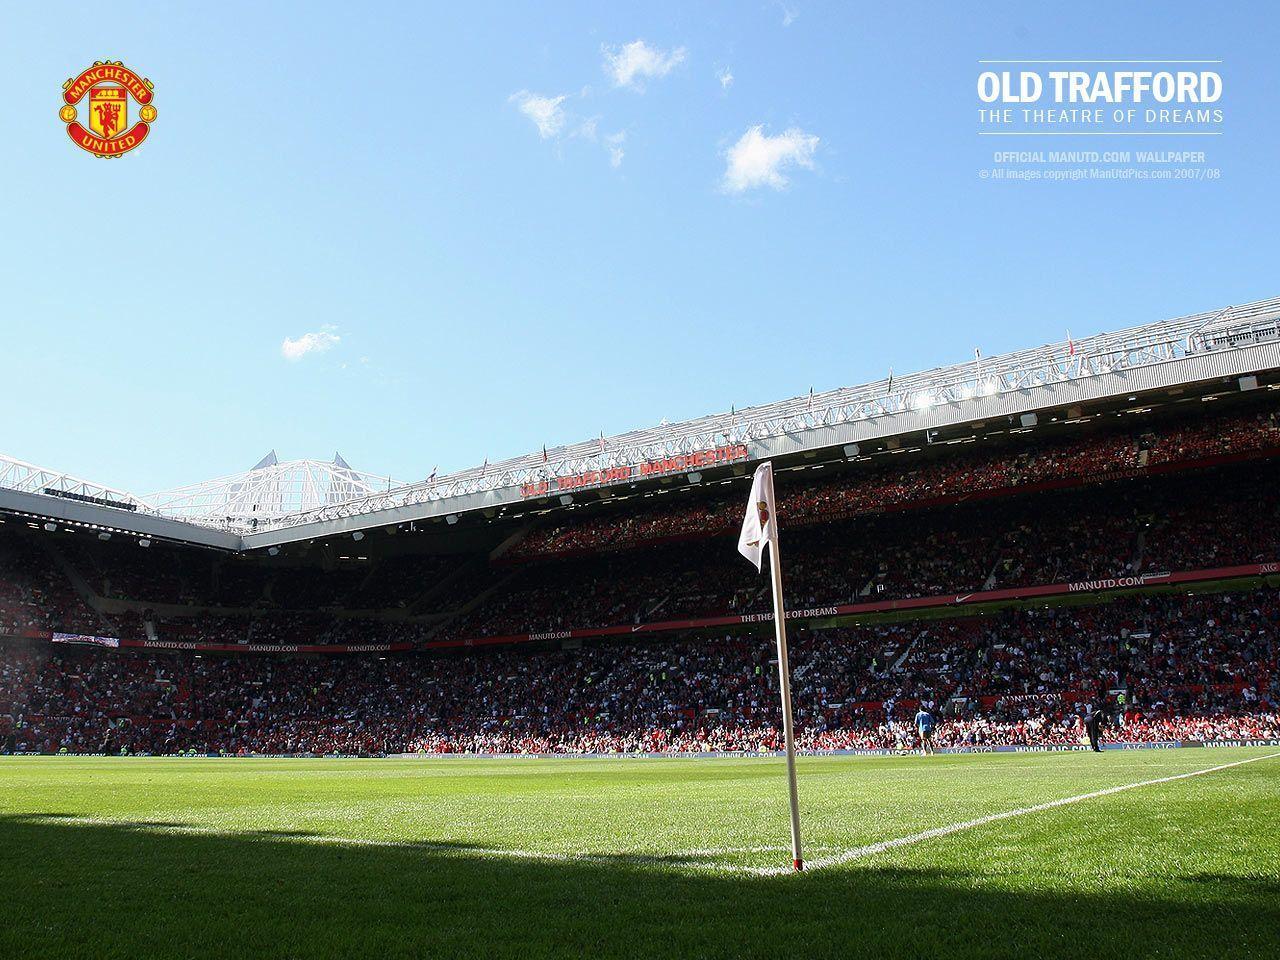 Manchester United Old Trafford Stadium Tours. Old Trafford Stadium